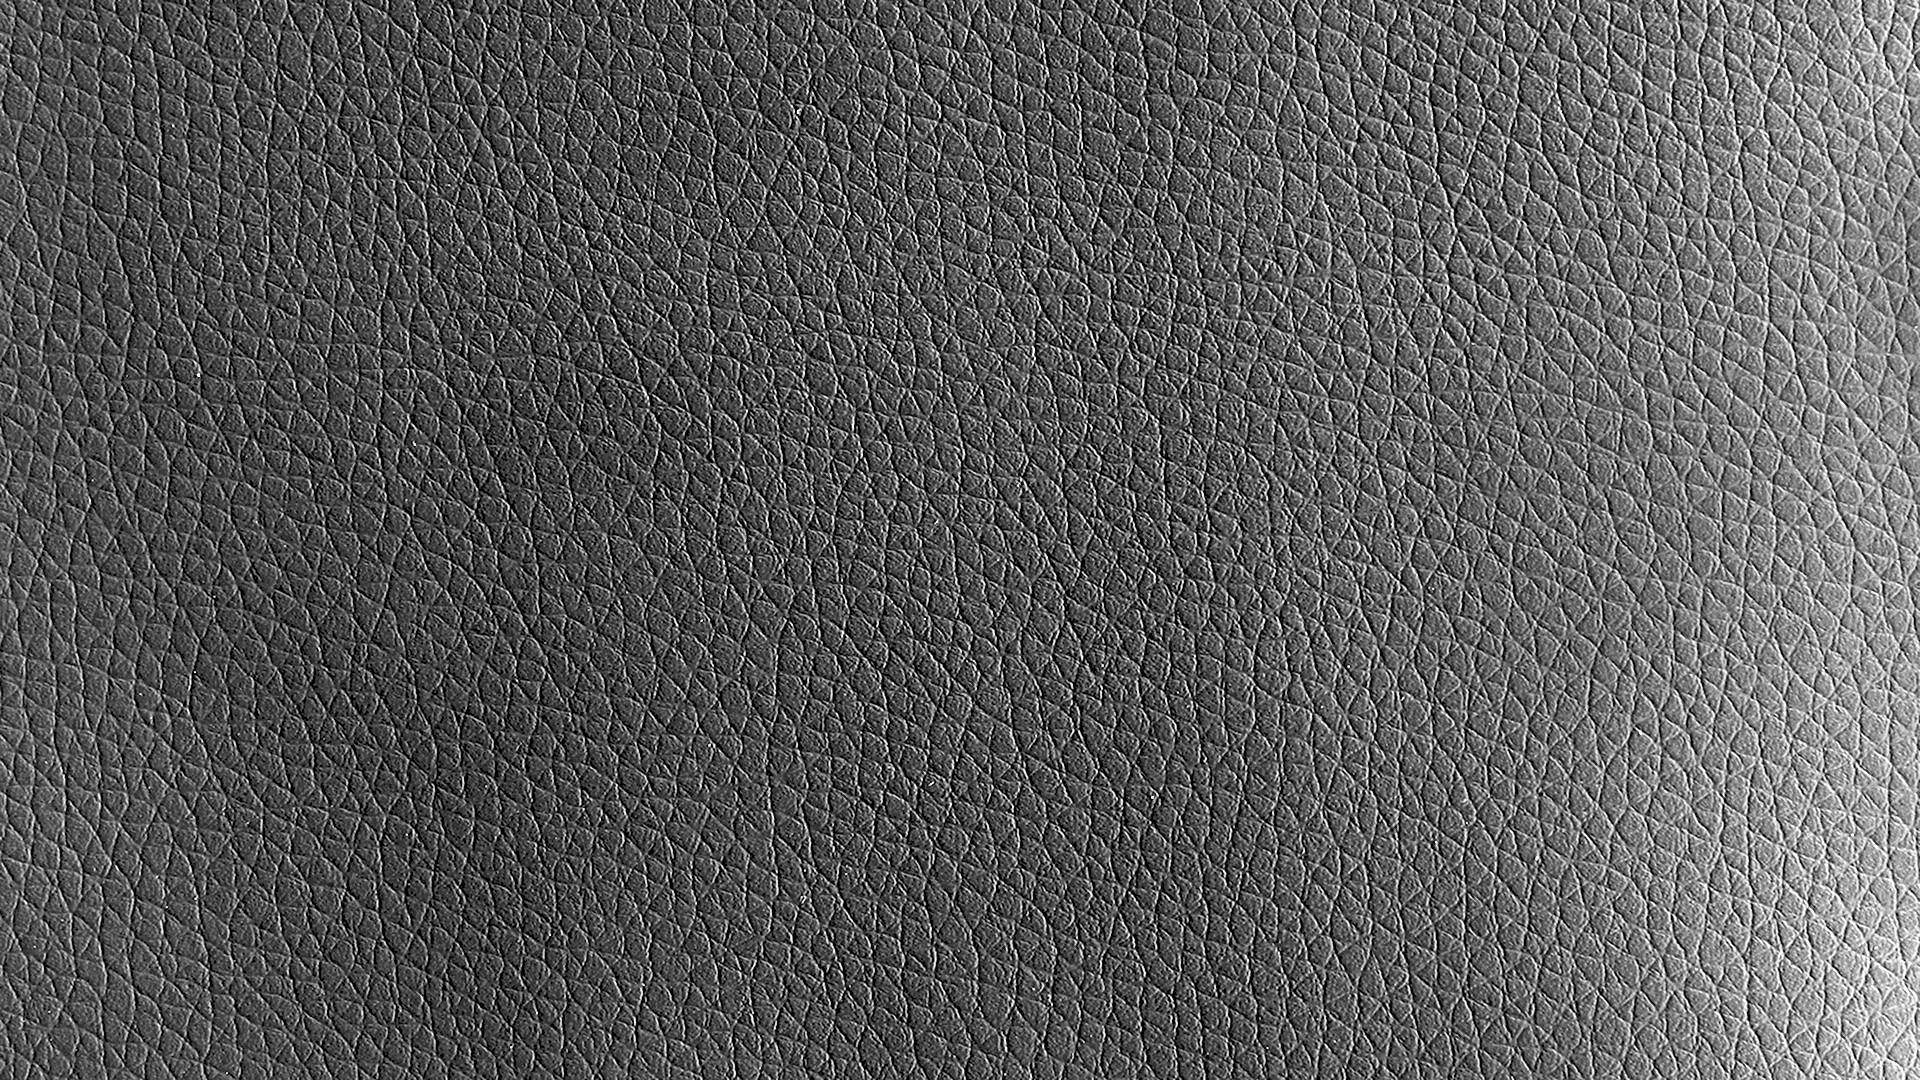 Texture Leather Black 3ds Max